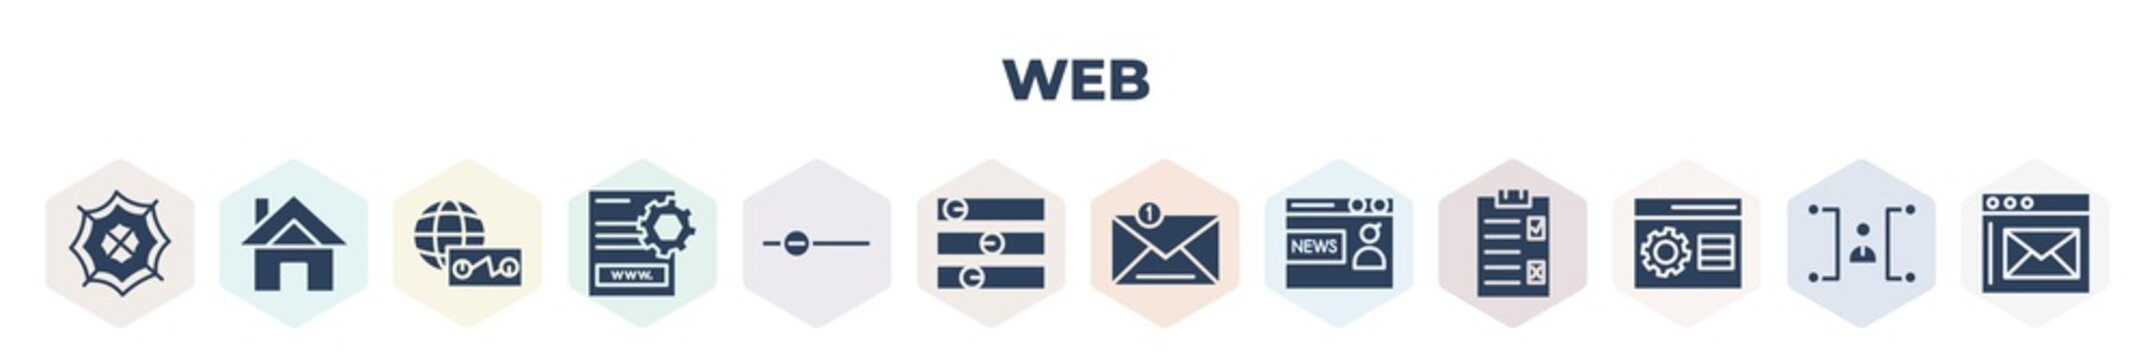 filled web icons set. glyph icons such as cobweb and spider, home button, web stocks data line graphic interface, page ting interface, slider, on slider, close envelope, newscaster, favorite up,